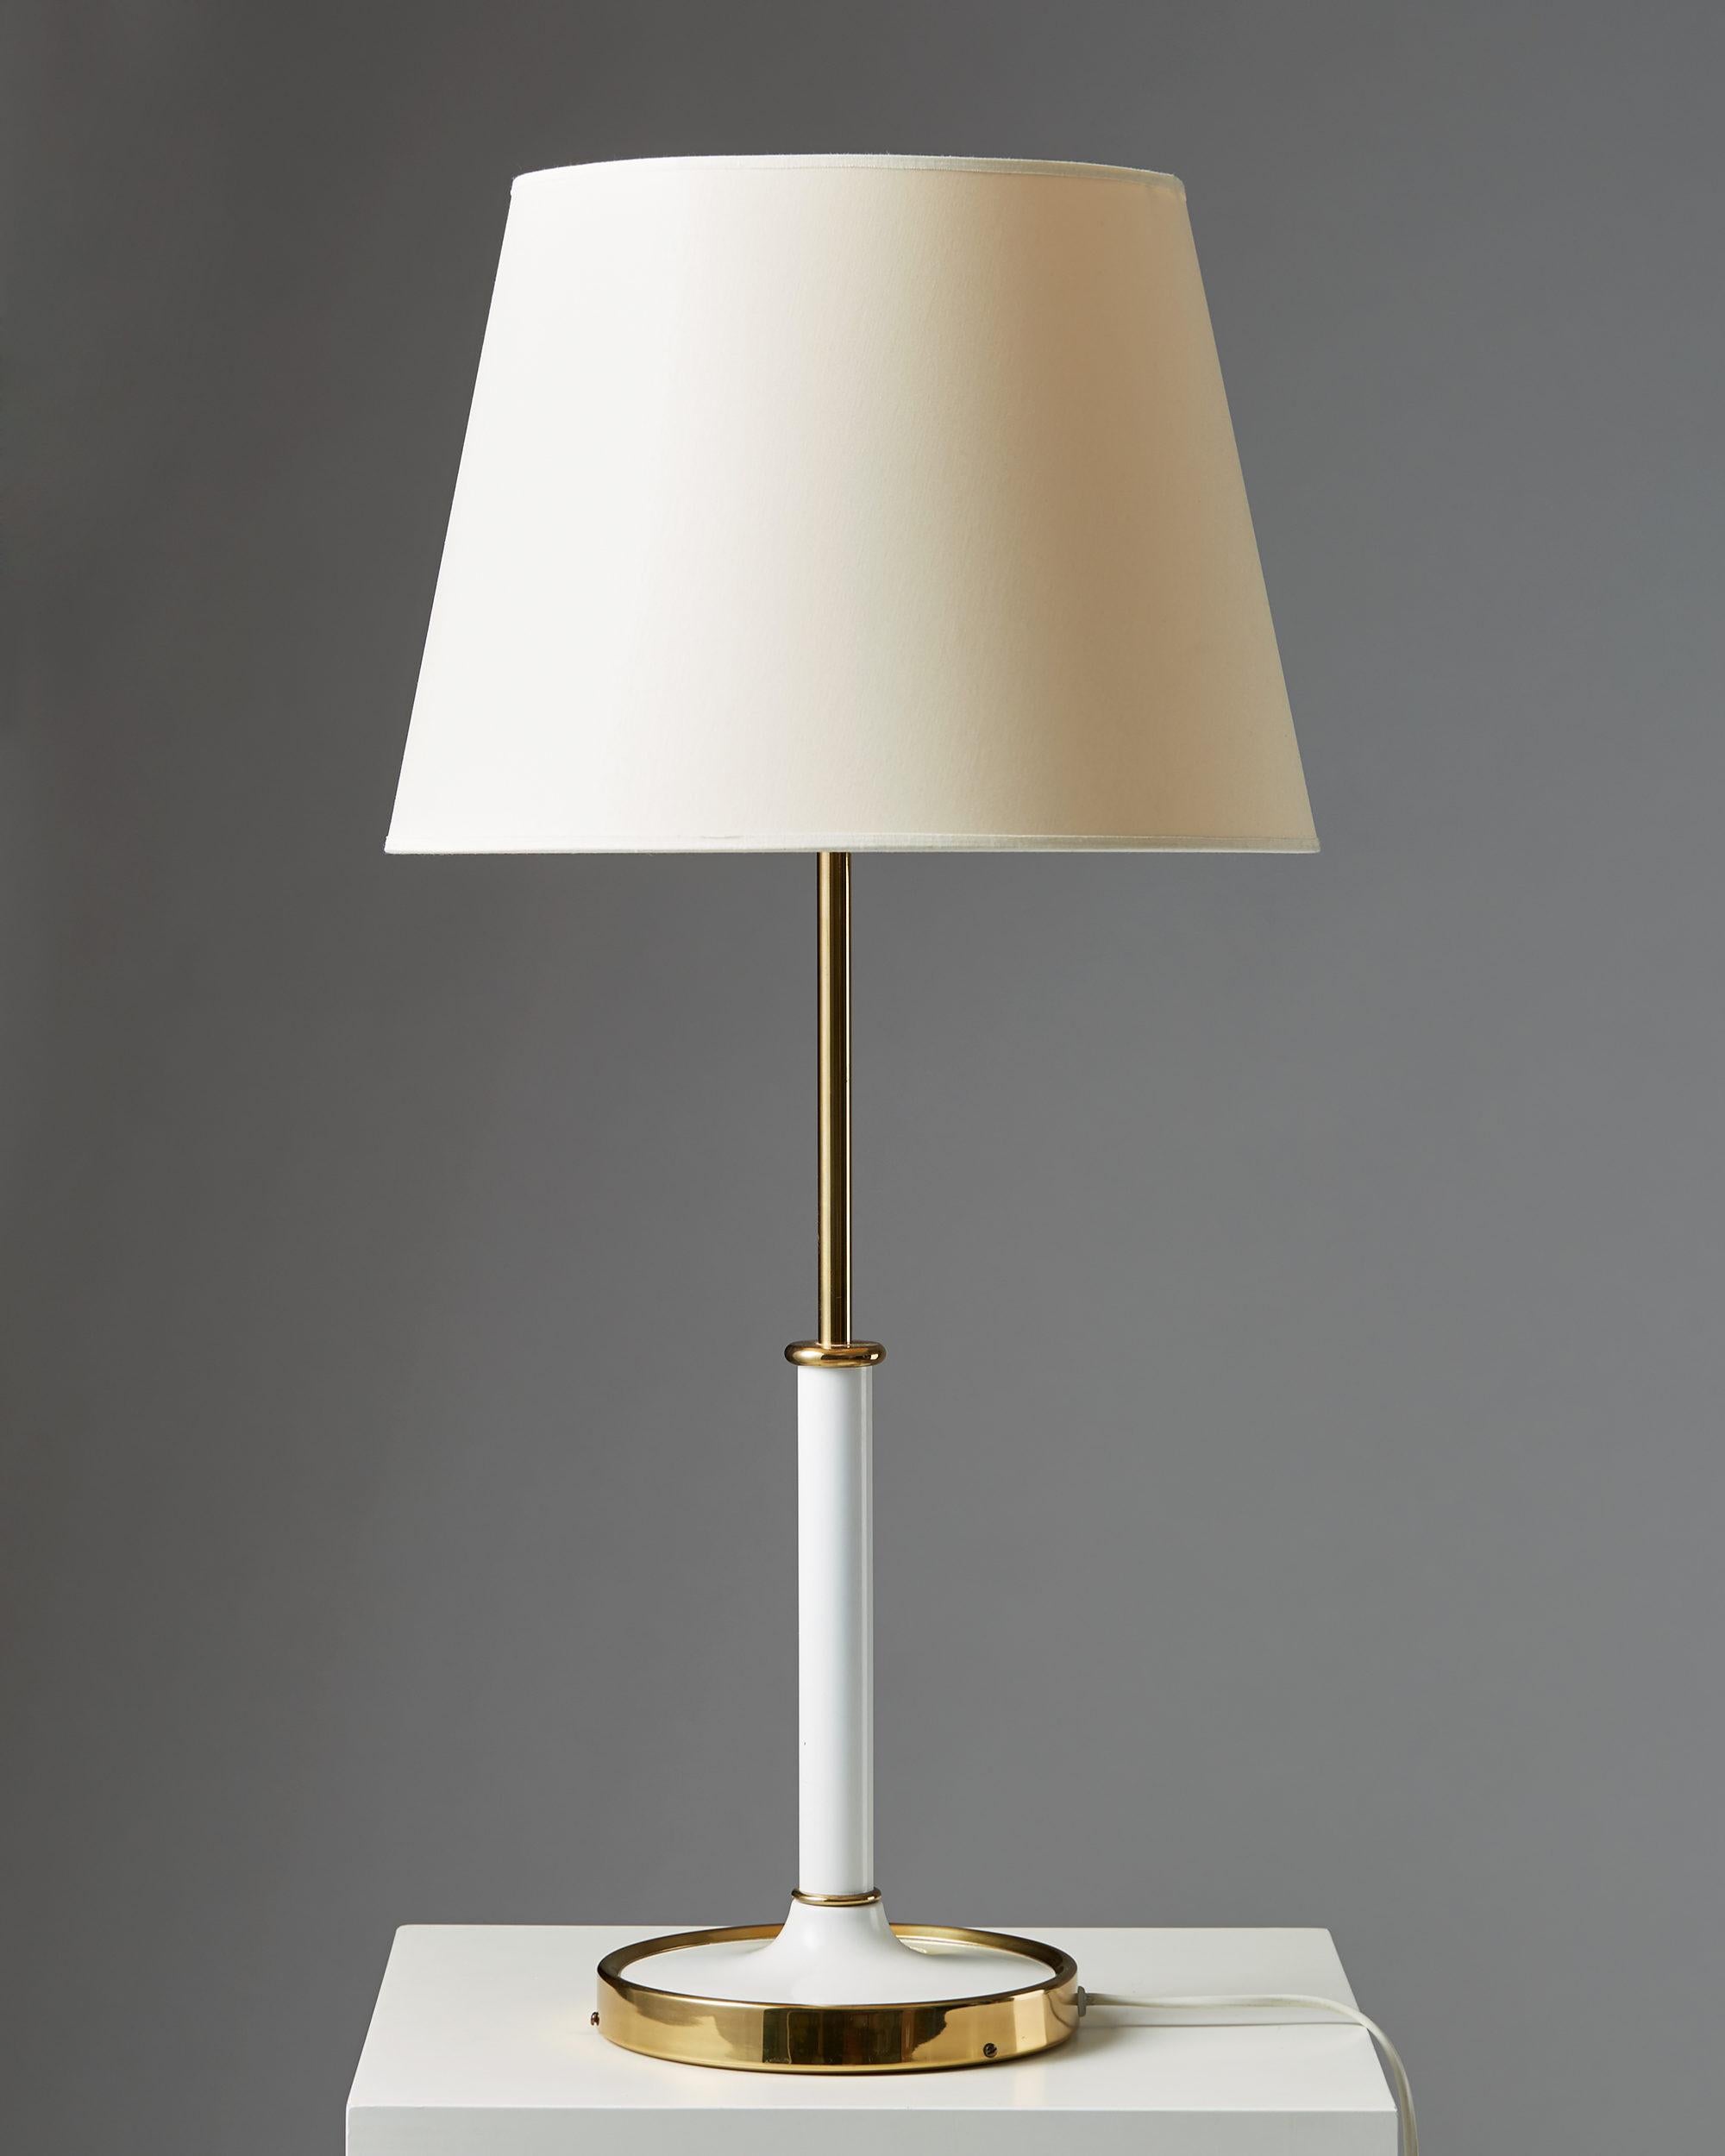 Lacquered and polished brass with fabric shade. 
Measures: H 69 cm/ 27